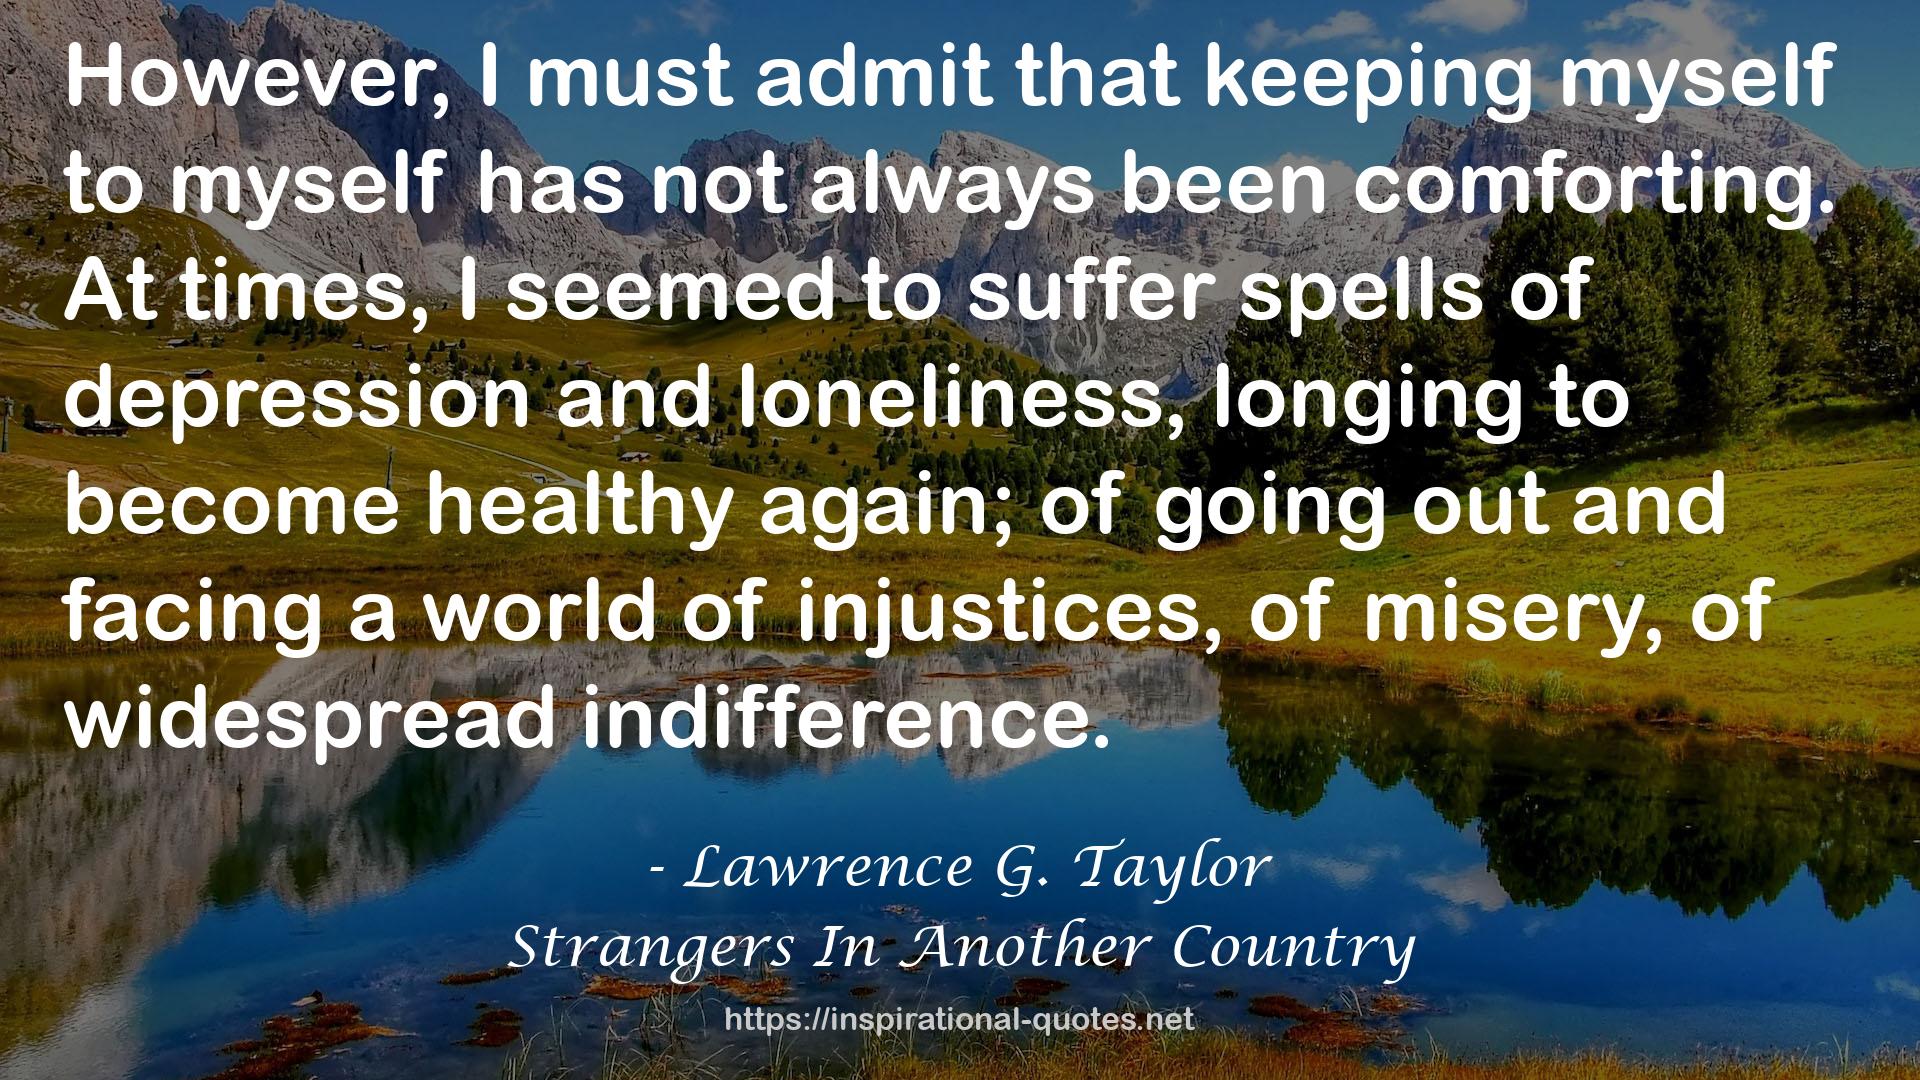 Lawrence G. Taylor QUOTES